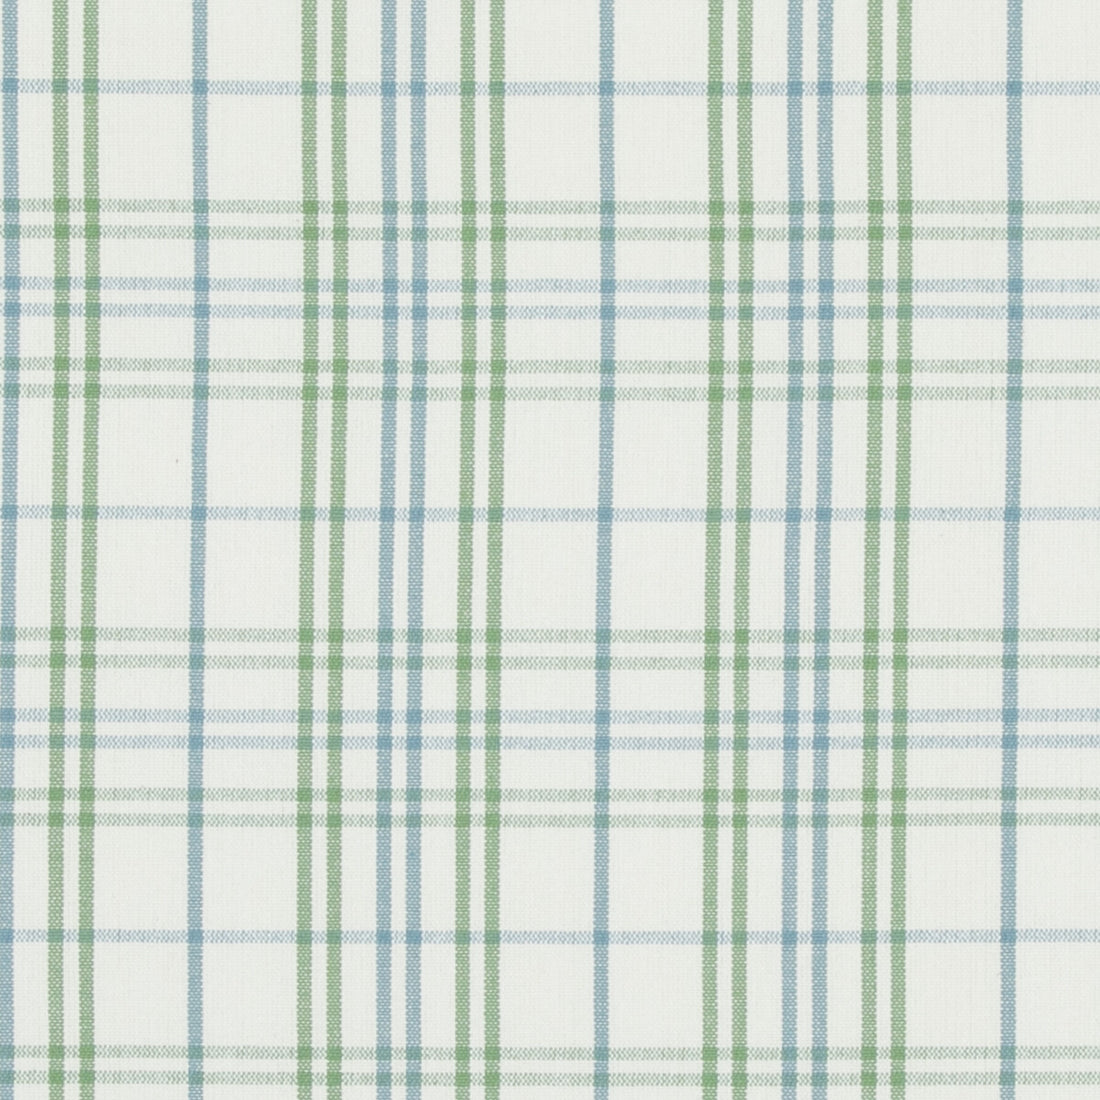 Purbeck Check fabric in green/aqua color - pattern PF50508.5.0 - by Baker Lifestyle in the Bridport collection